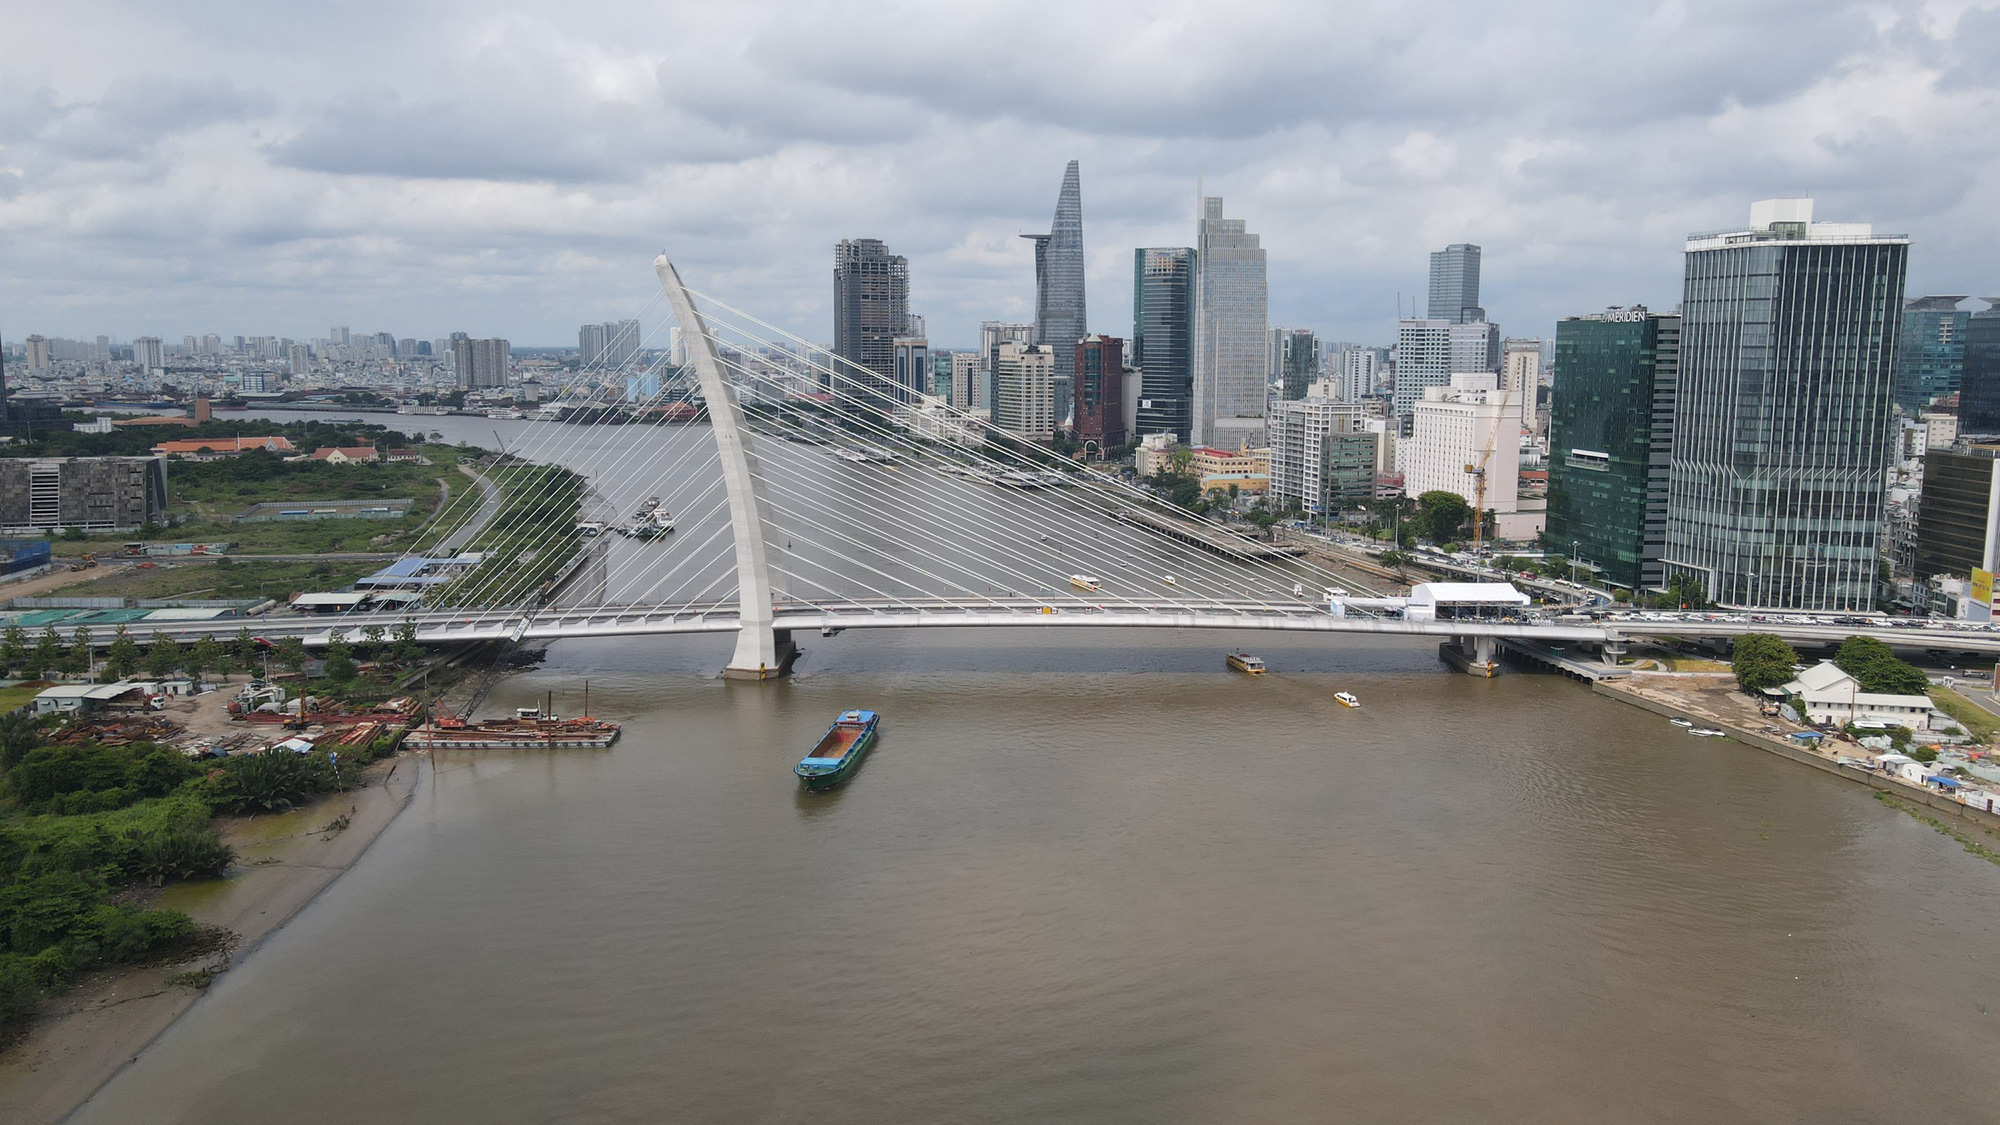 Ho Chi Minh City officially opened Thu Thiem 2 bridge after 7 years of construction - Photo 1.